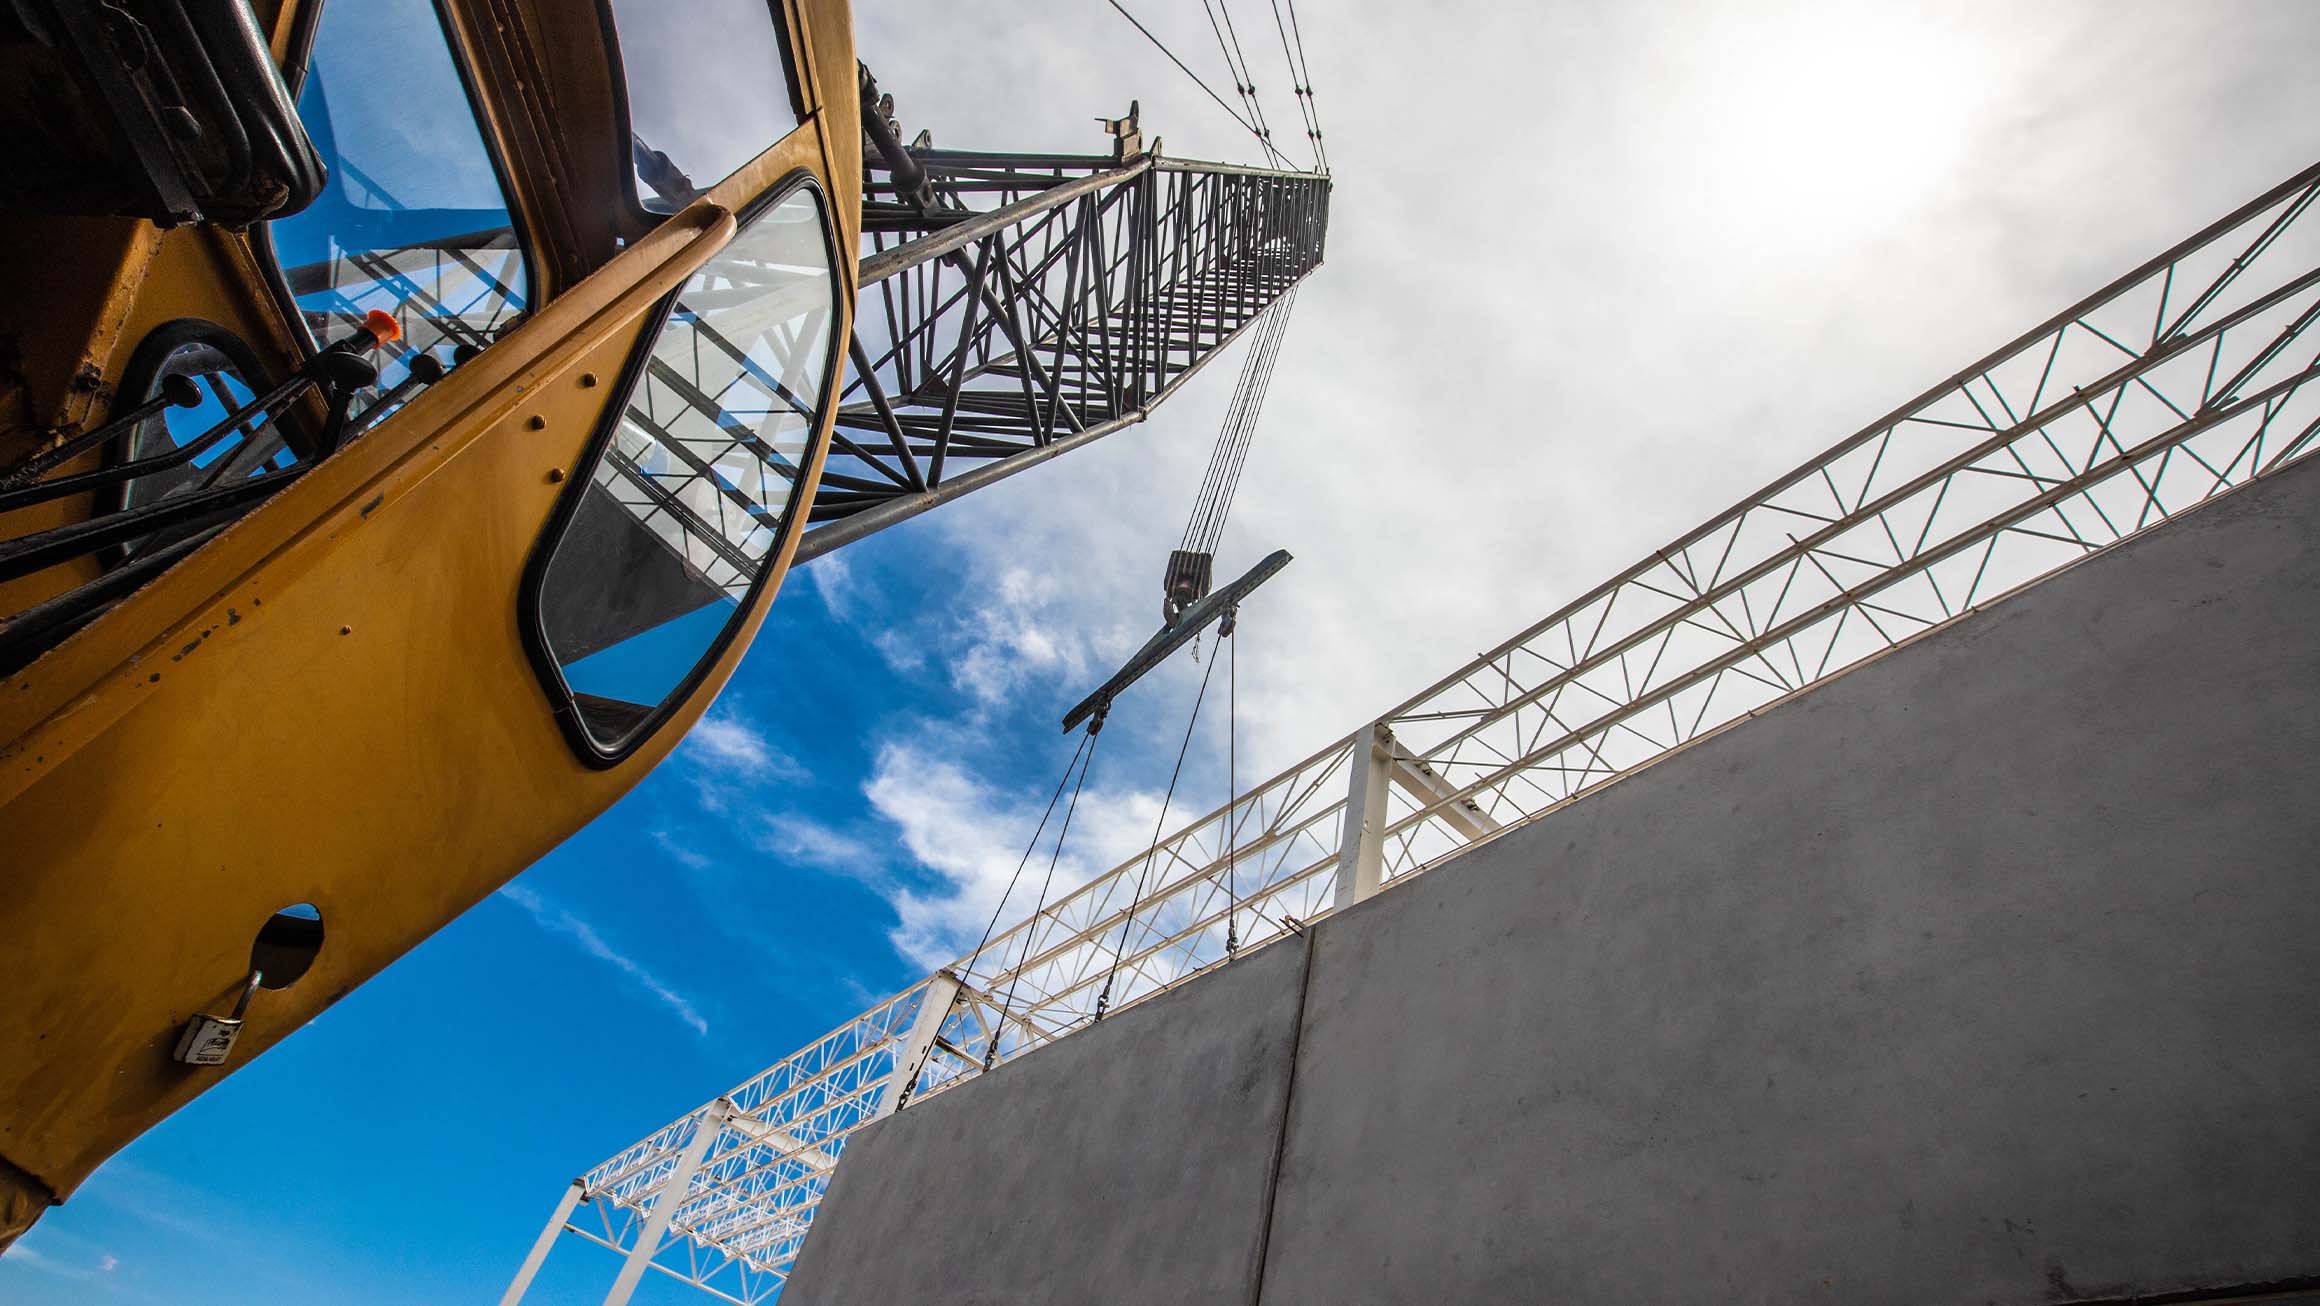 Photograph of a construction crane lifting concrete slabs on an industrial building construction site